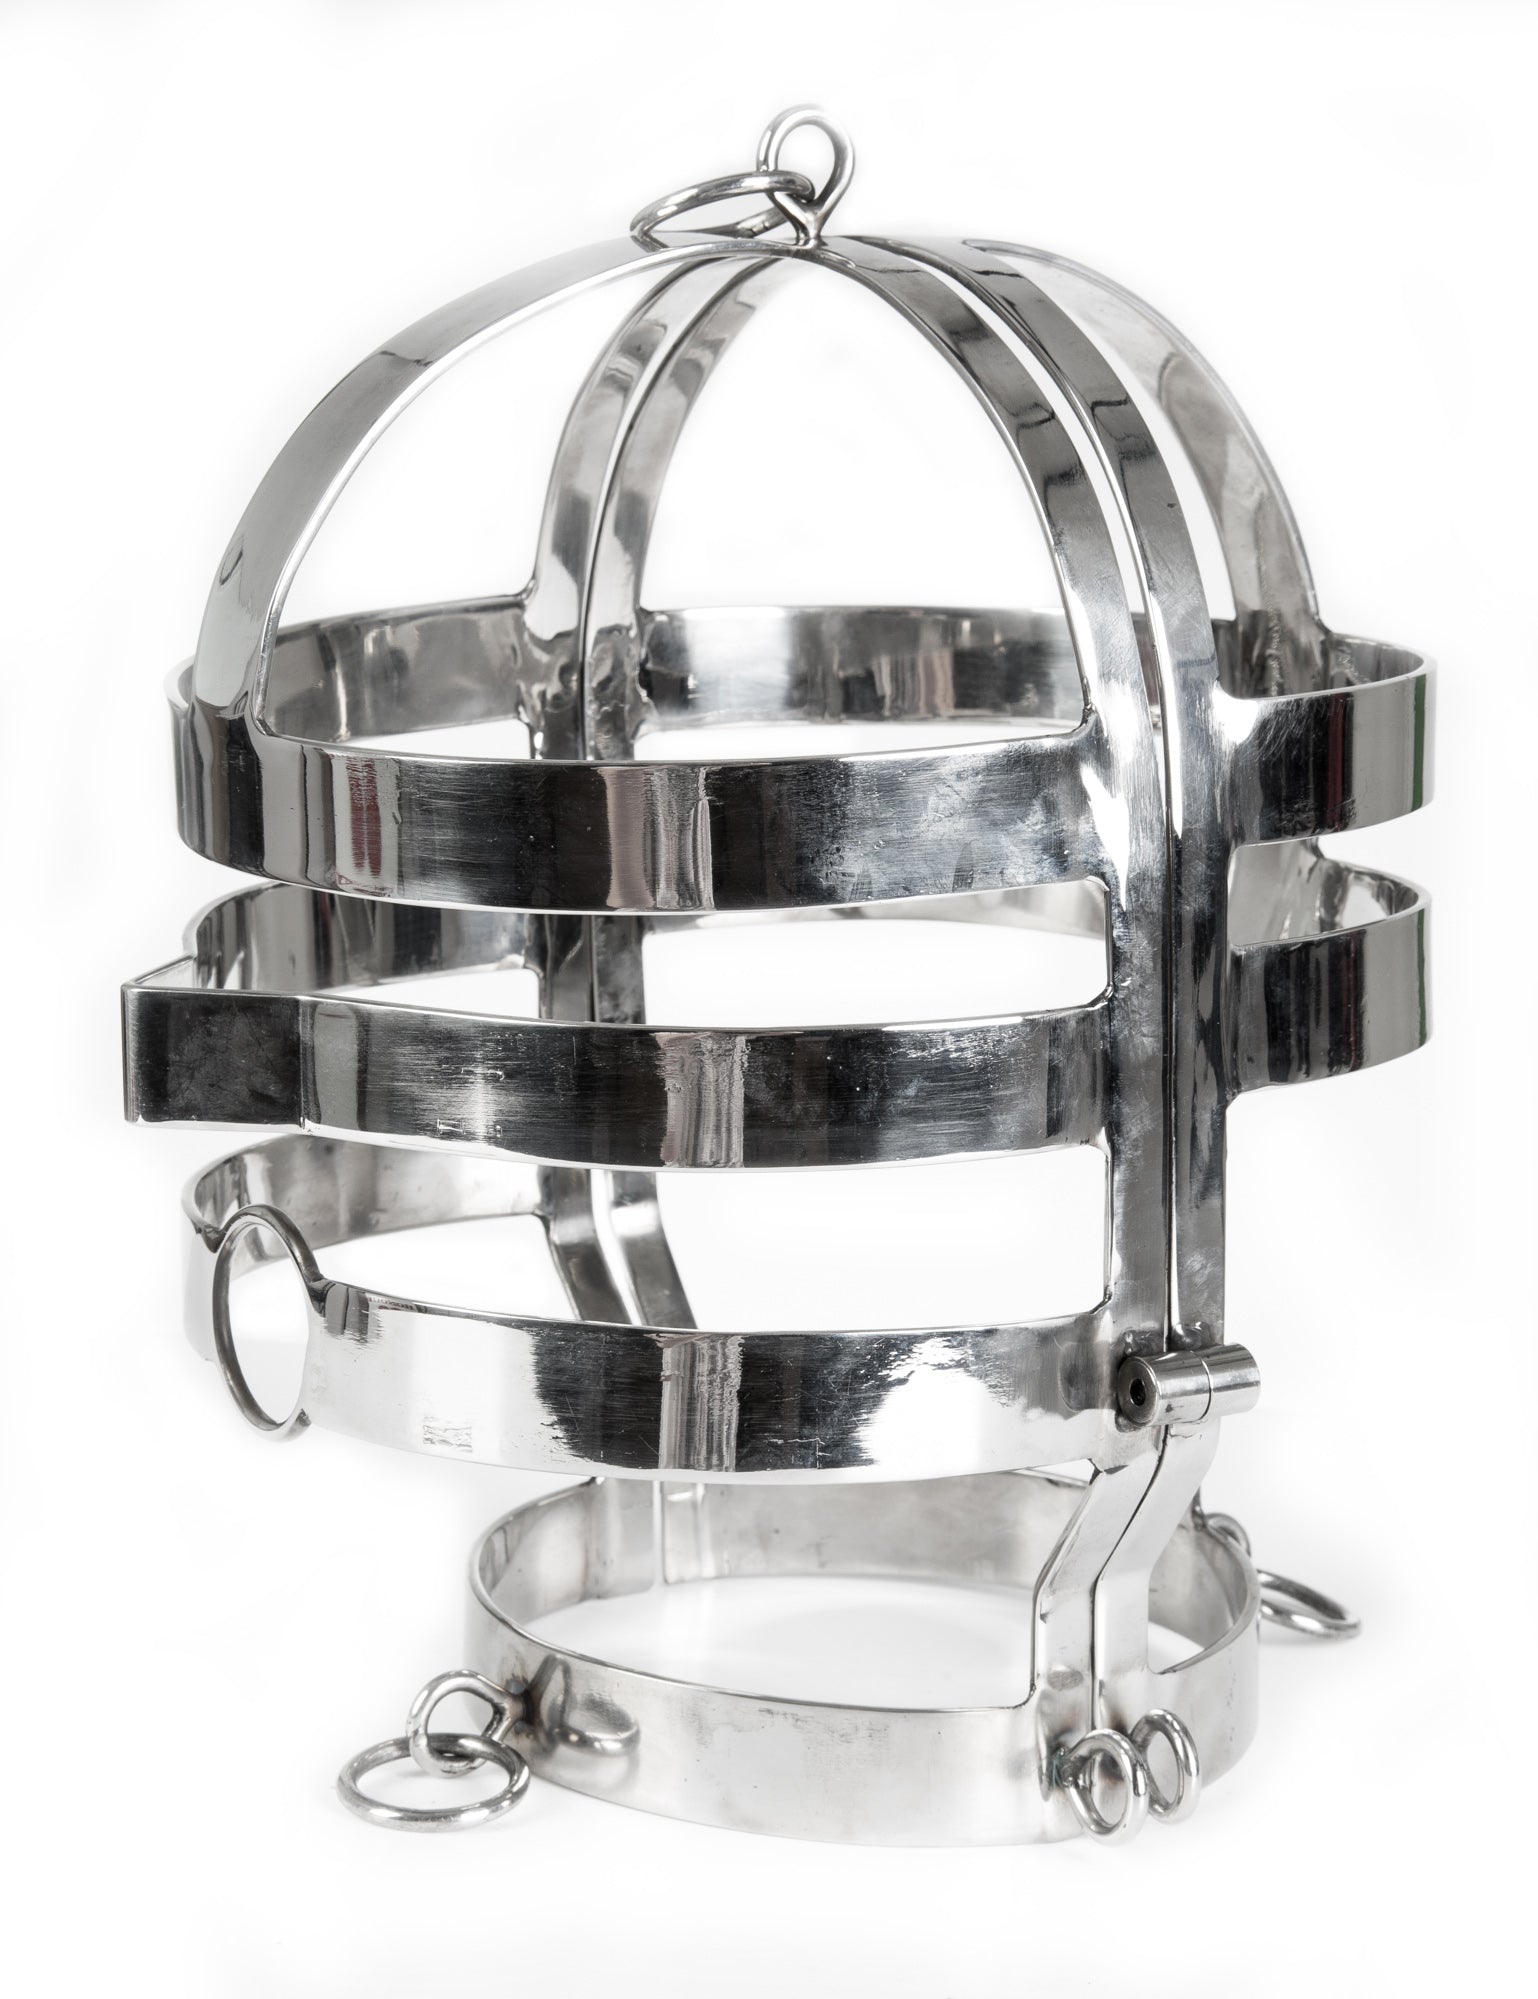 Rigid Head Cage | Bondage Hoods from Honour – Skin Two US